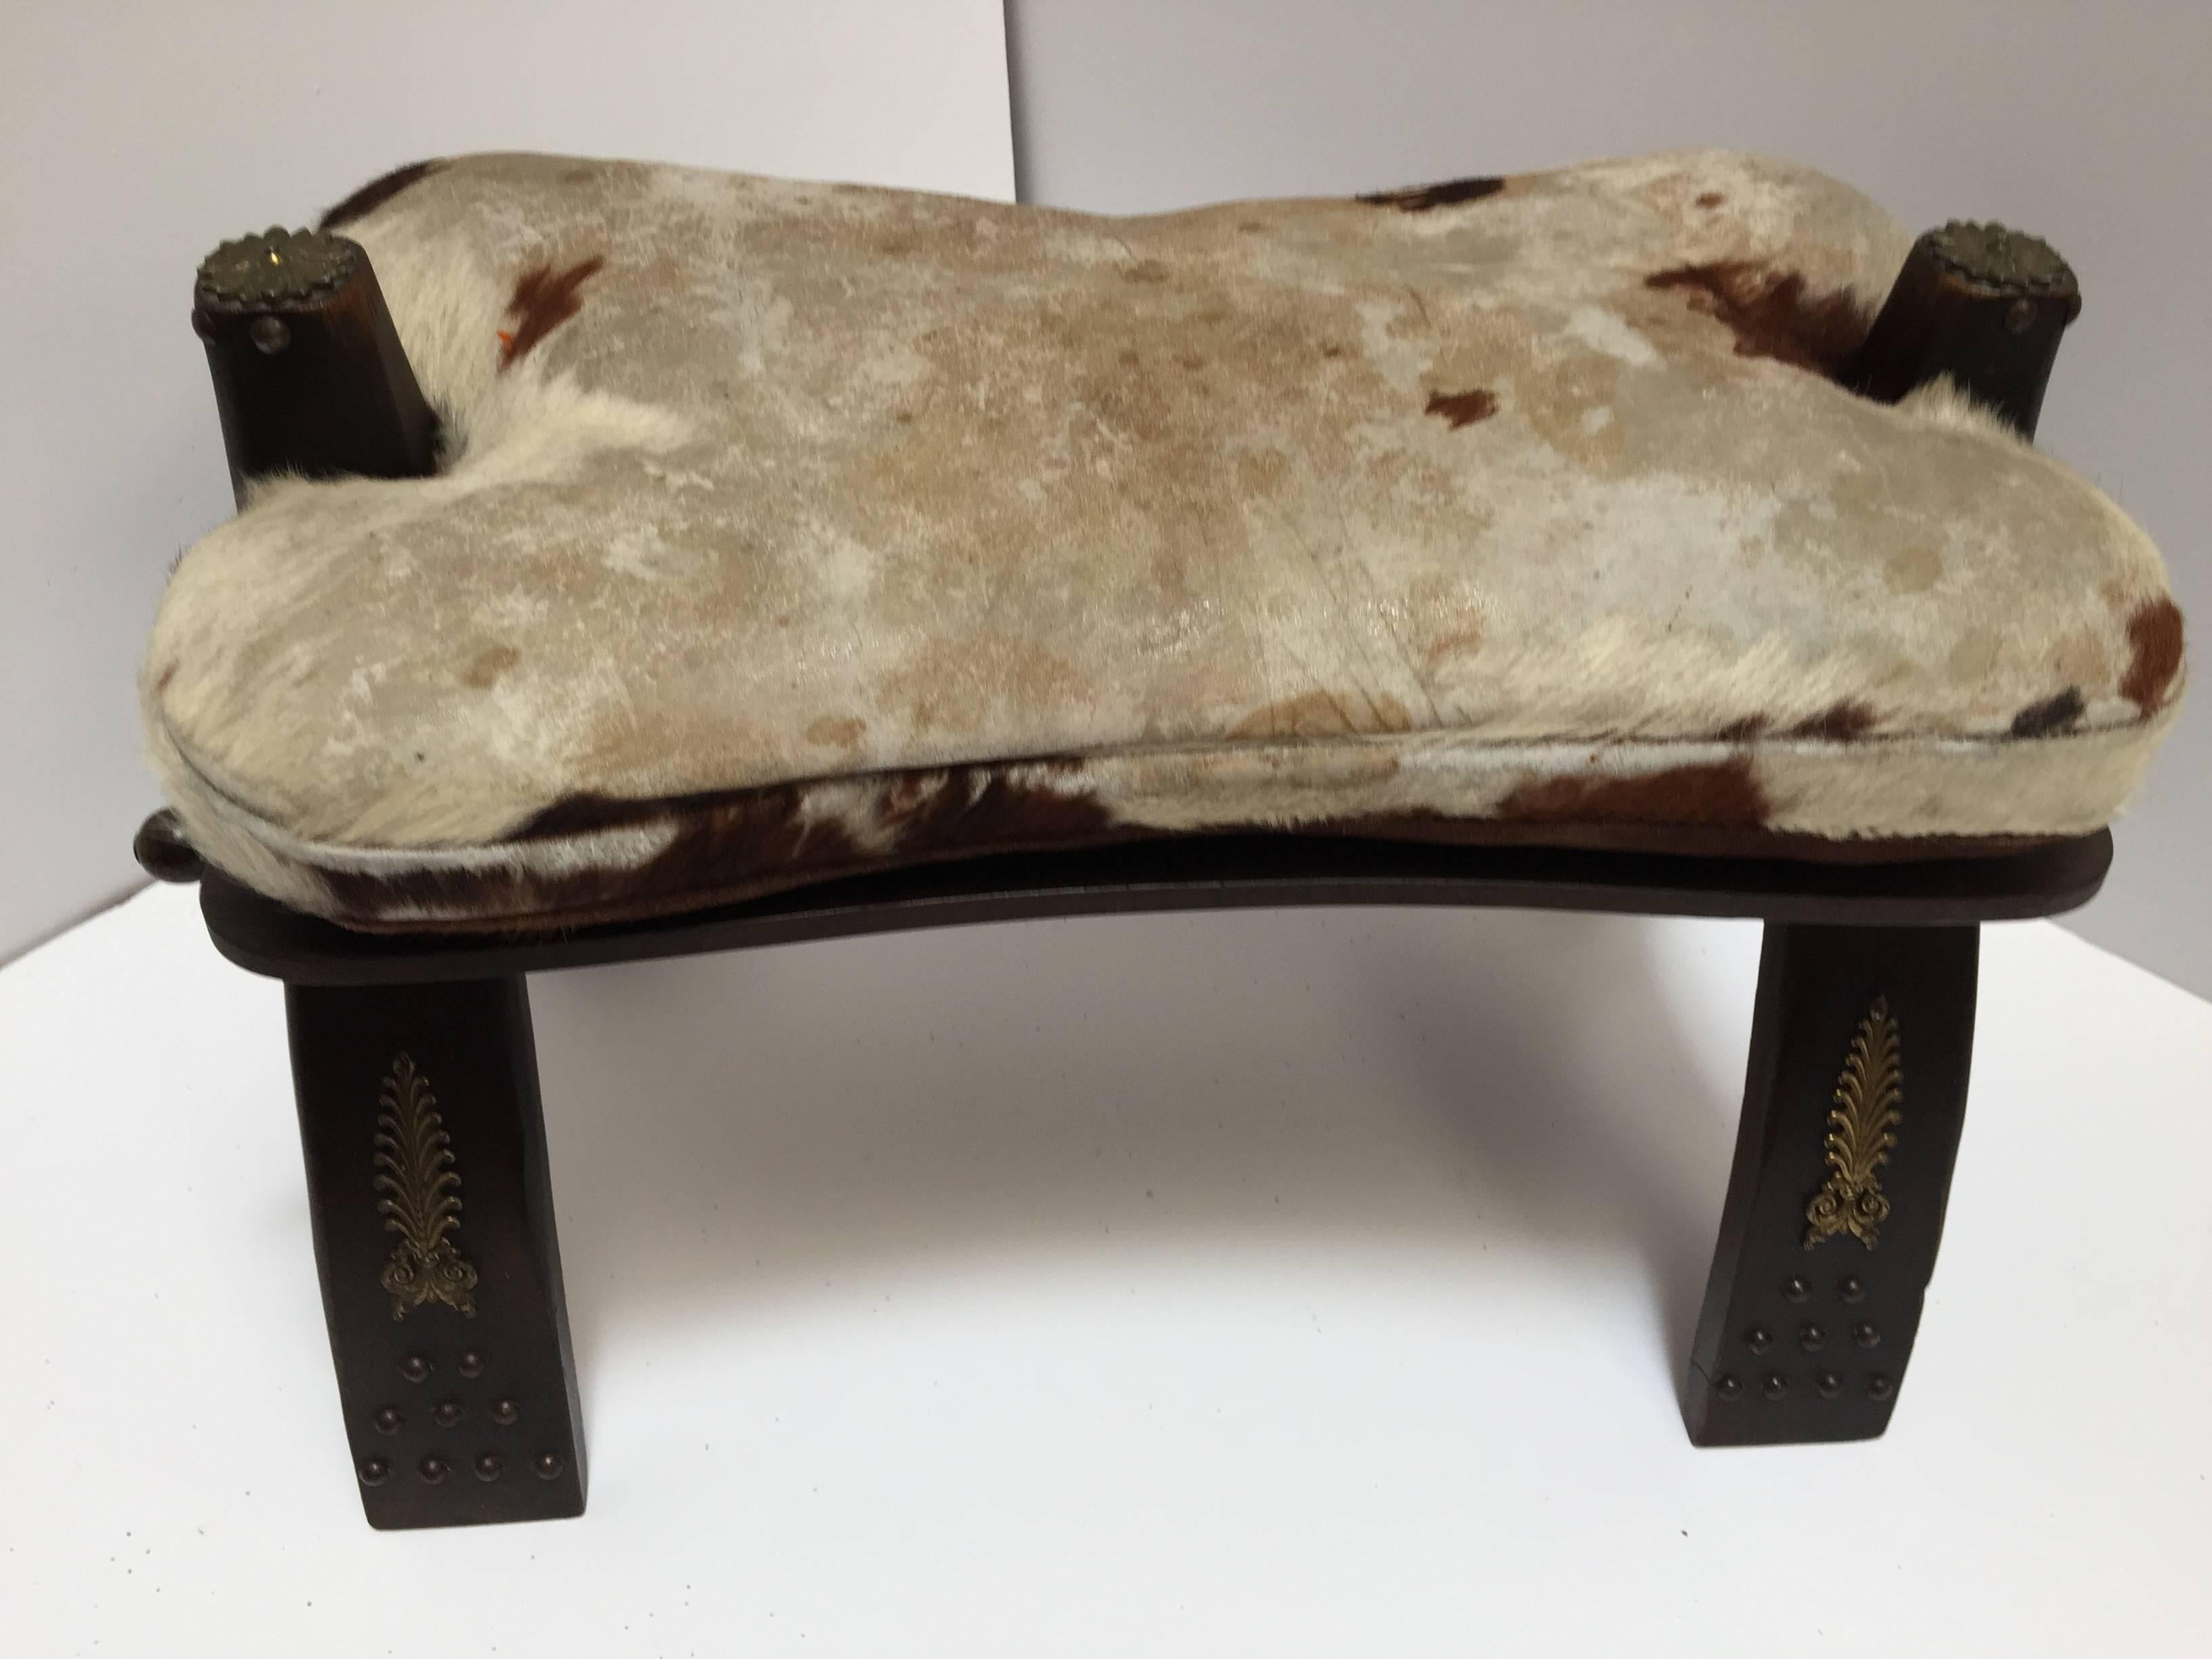 Vintage Moroccan camel saddle shape stool.
Traditionally used to ride camels in the desert, this camel saddle could be used as a foot stool or just as an accent piece in any room.
Wooden base is inlaid with brass floral decoration.
Moroccan